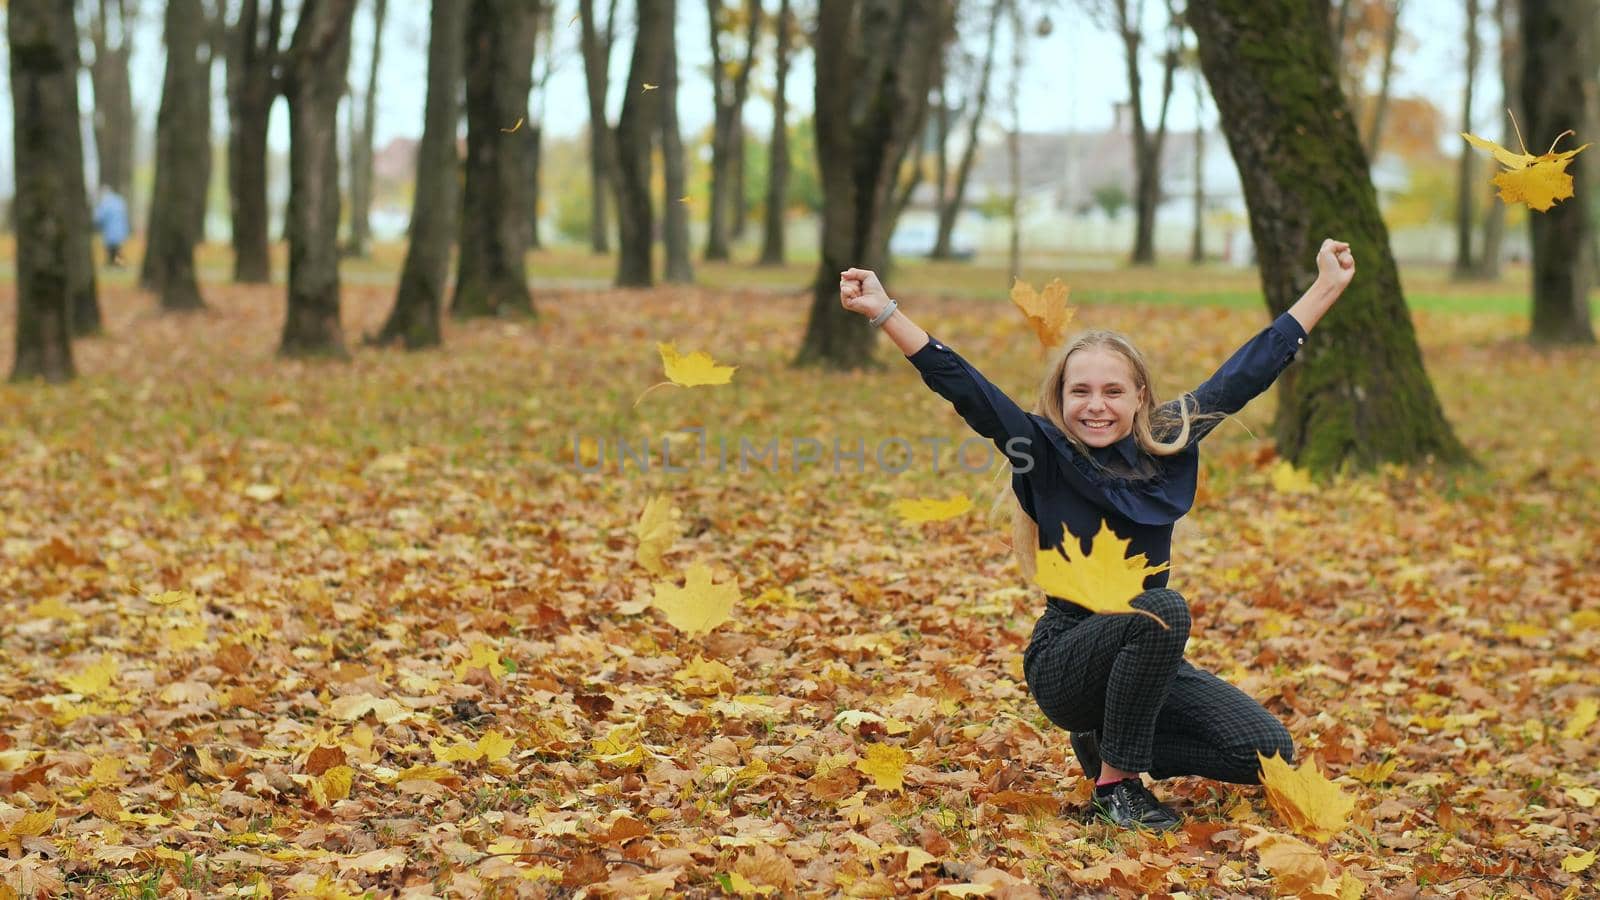 A young girl schoolgirl throws autumn leaves in a city park. Slow motion